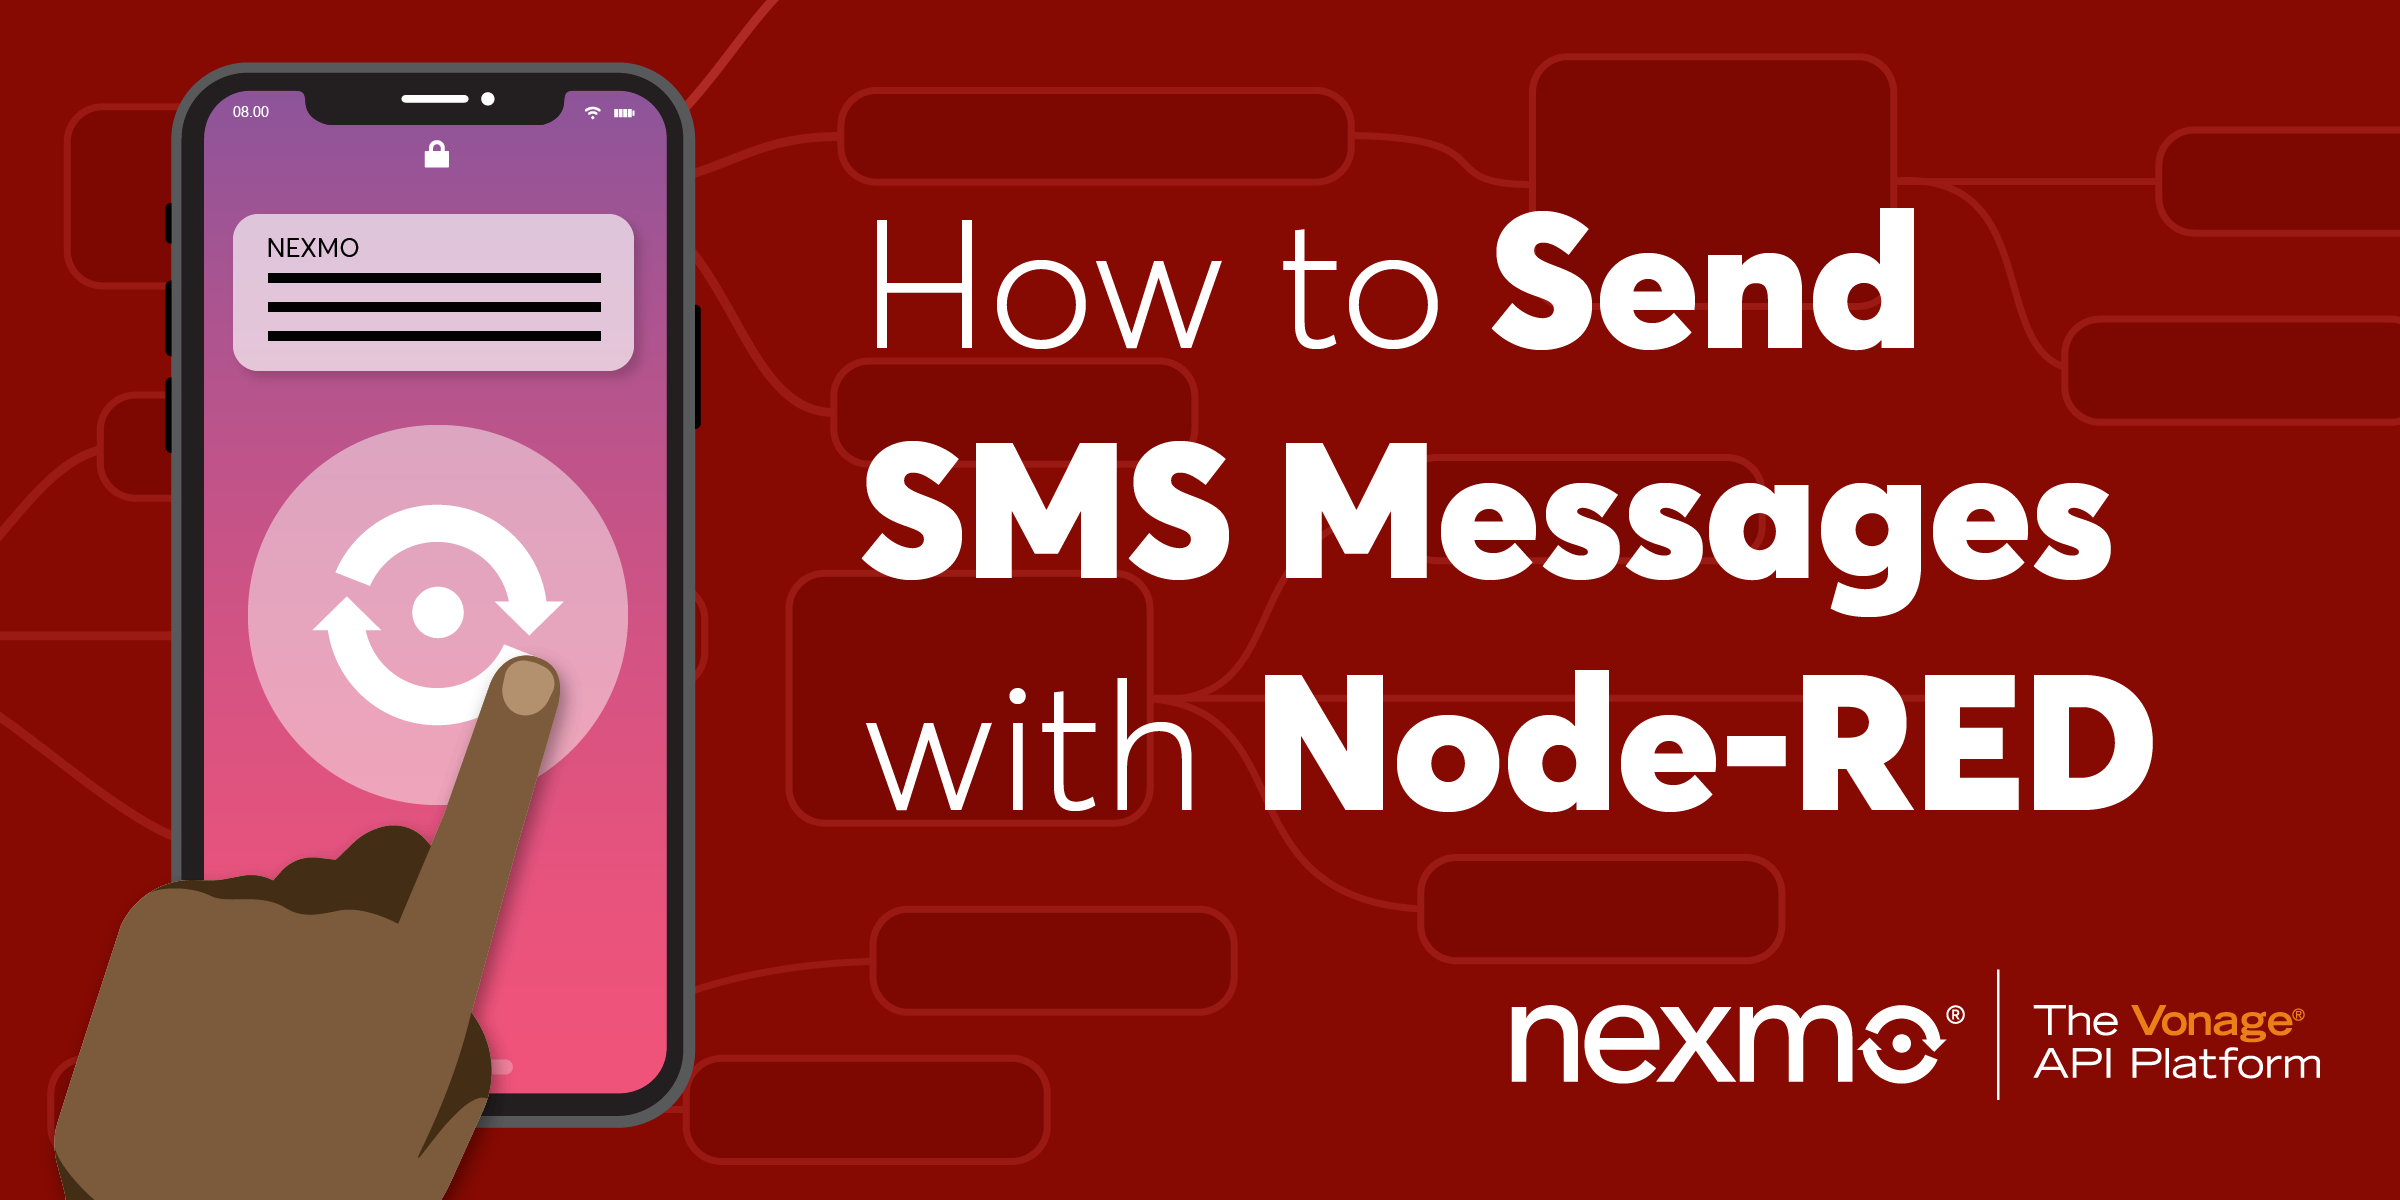 How to send SMS messages with Node-RED